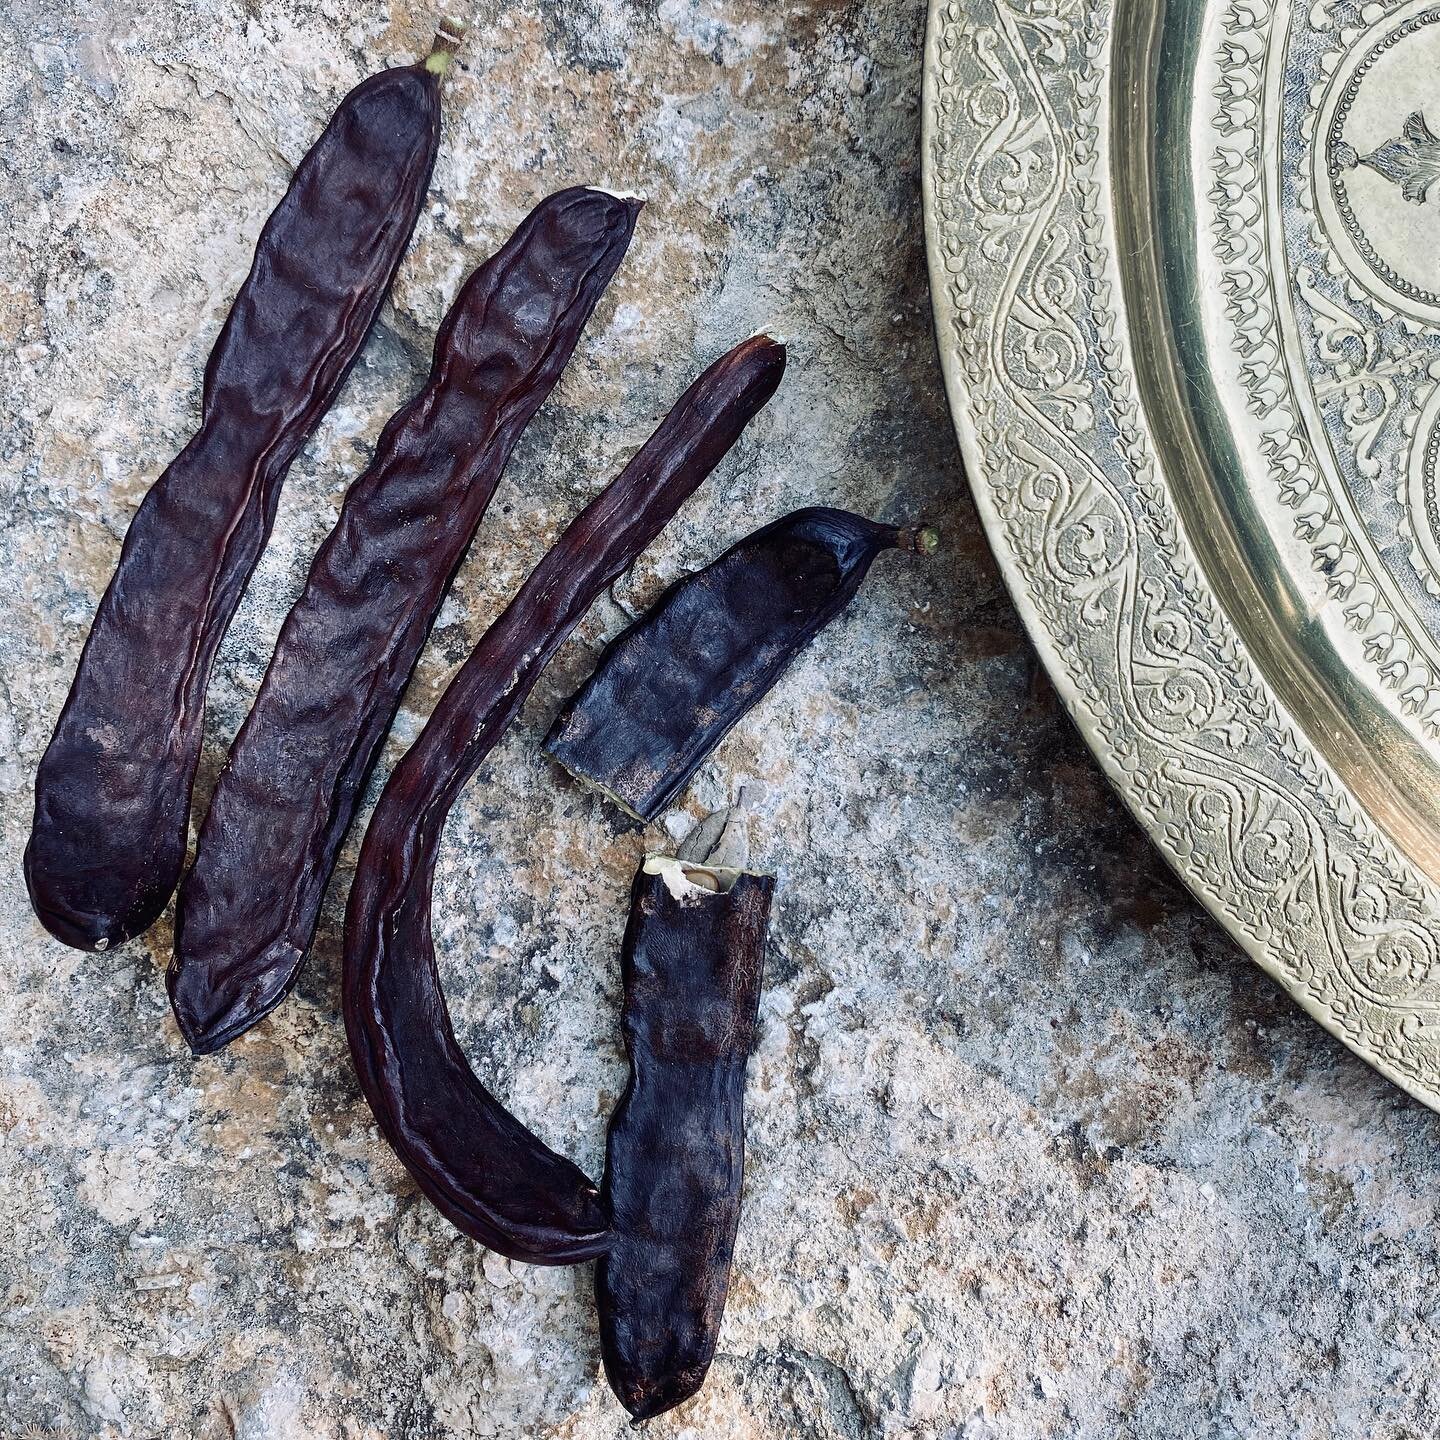 In Portugal, I was intrigued by this strange fruit whose trees surrounded our lovely B&amp;B, the Carob. It looks like a long dark brown pod. When broken, we discover seeds and a yellow pulp with a sweet chocolate smell. Personally, I even had the im